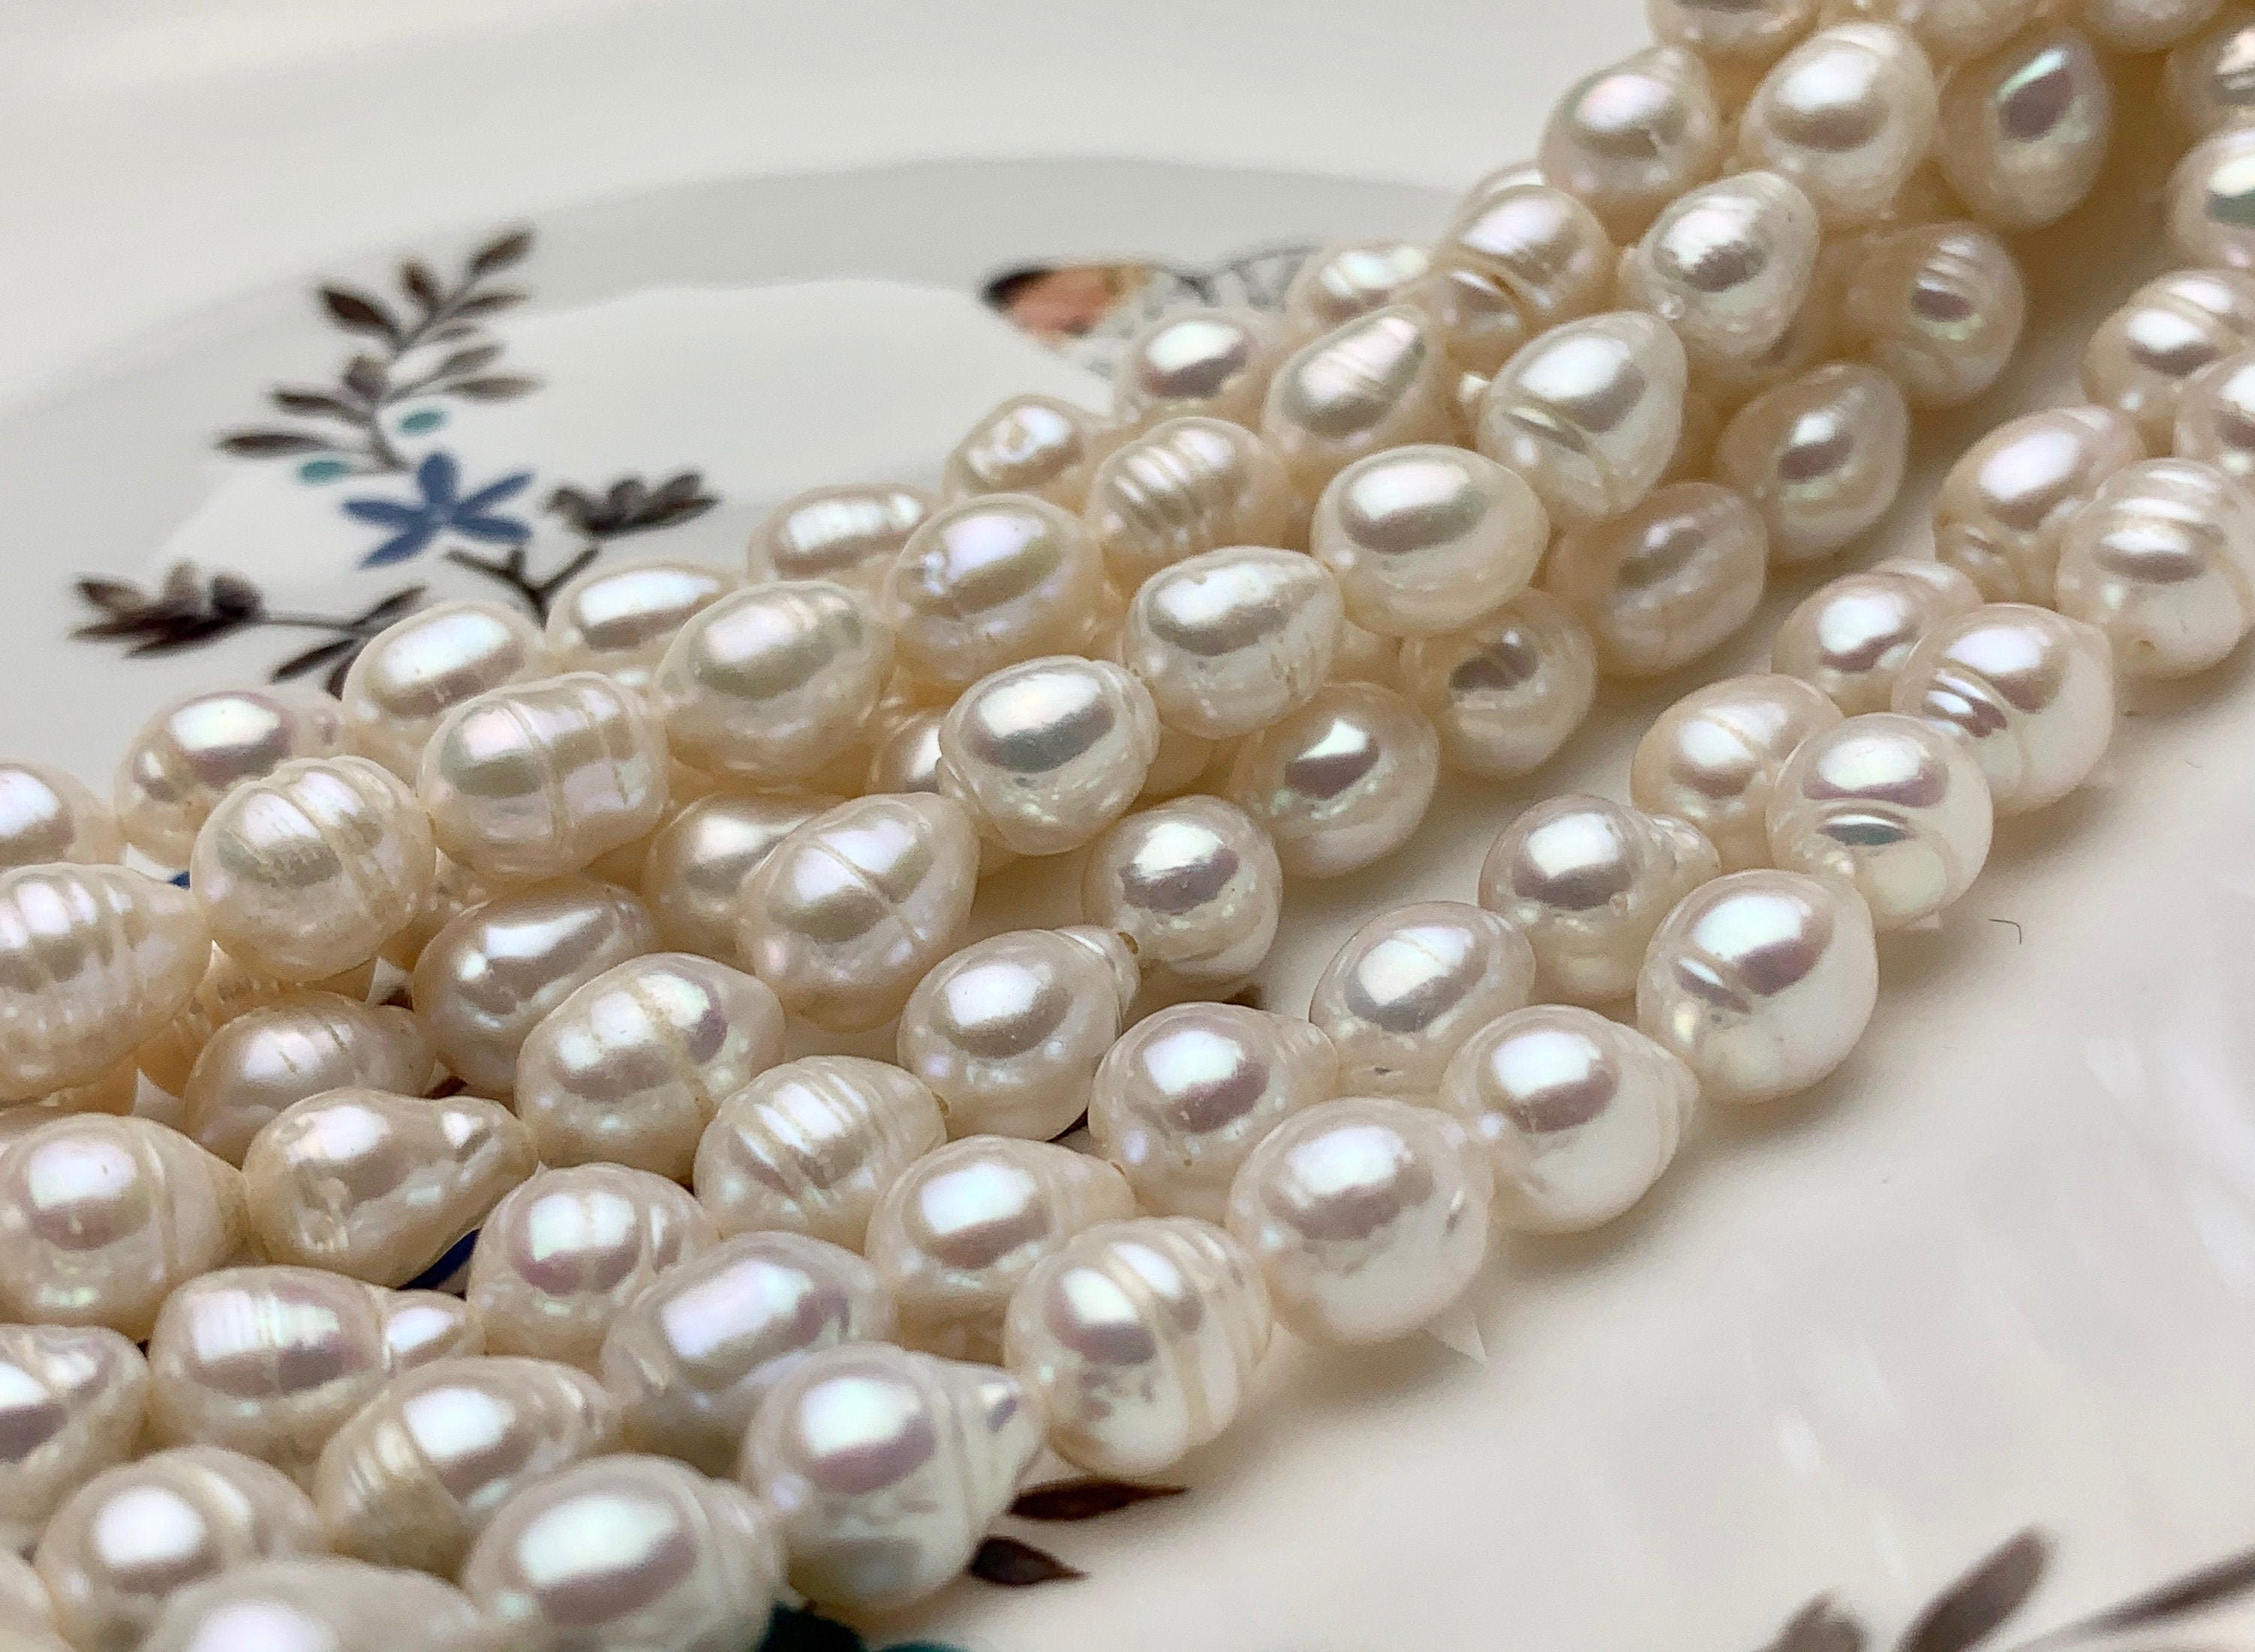 100pcs Pearl Beads Through Hole Ivory Pearl Vase Filler Craft Beads Loose  Pearls for Jewelry Making, Crafts -  Hong Kong